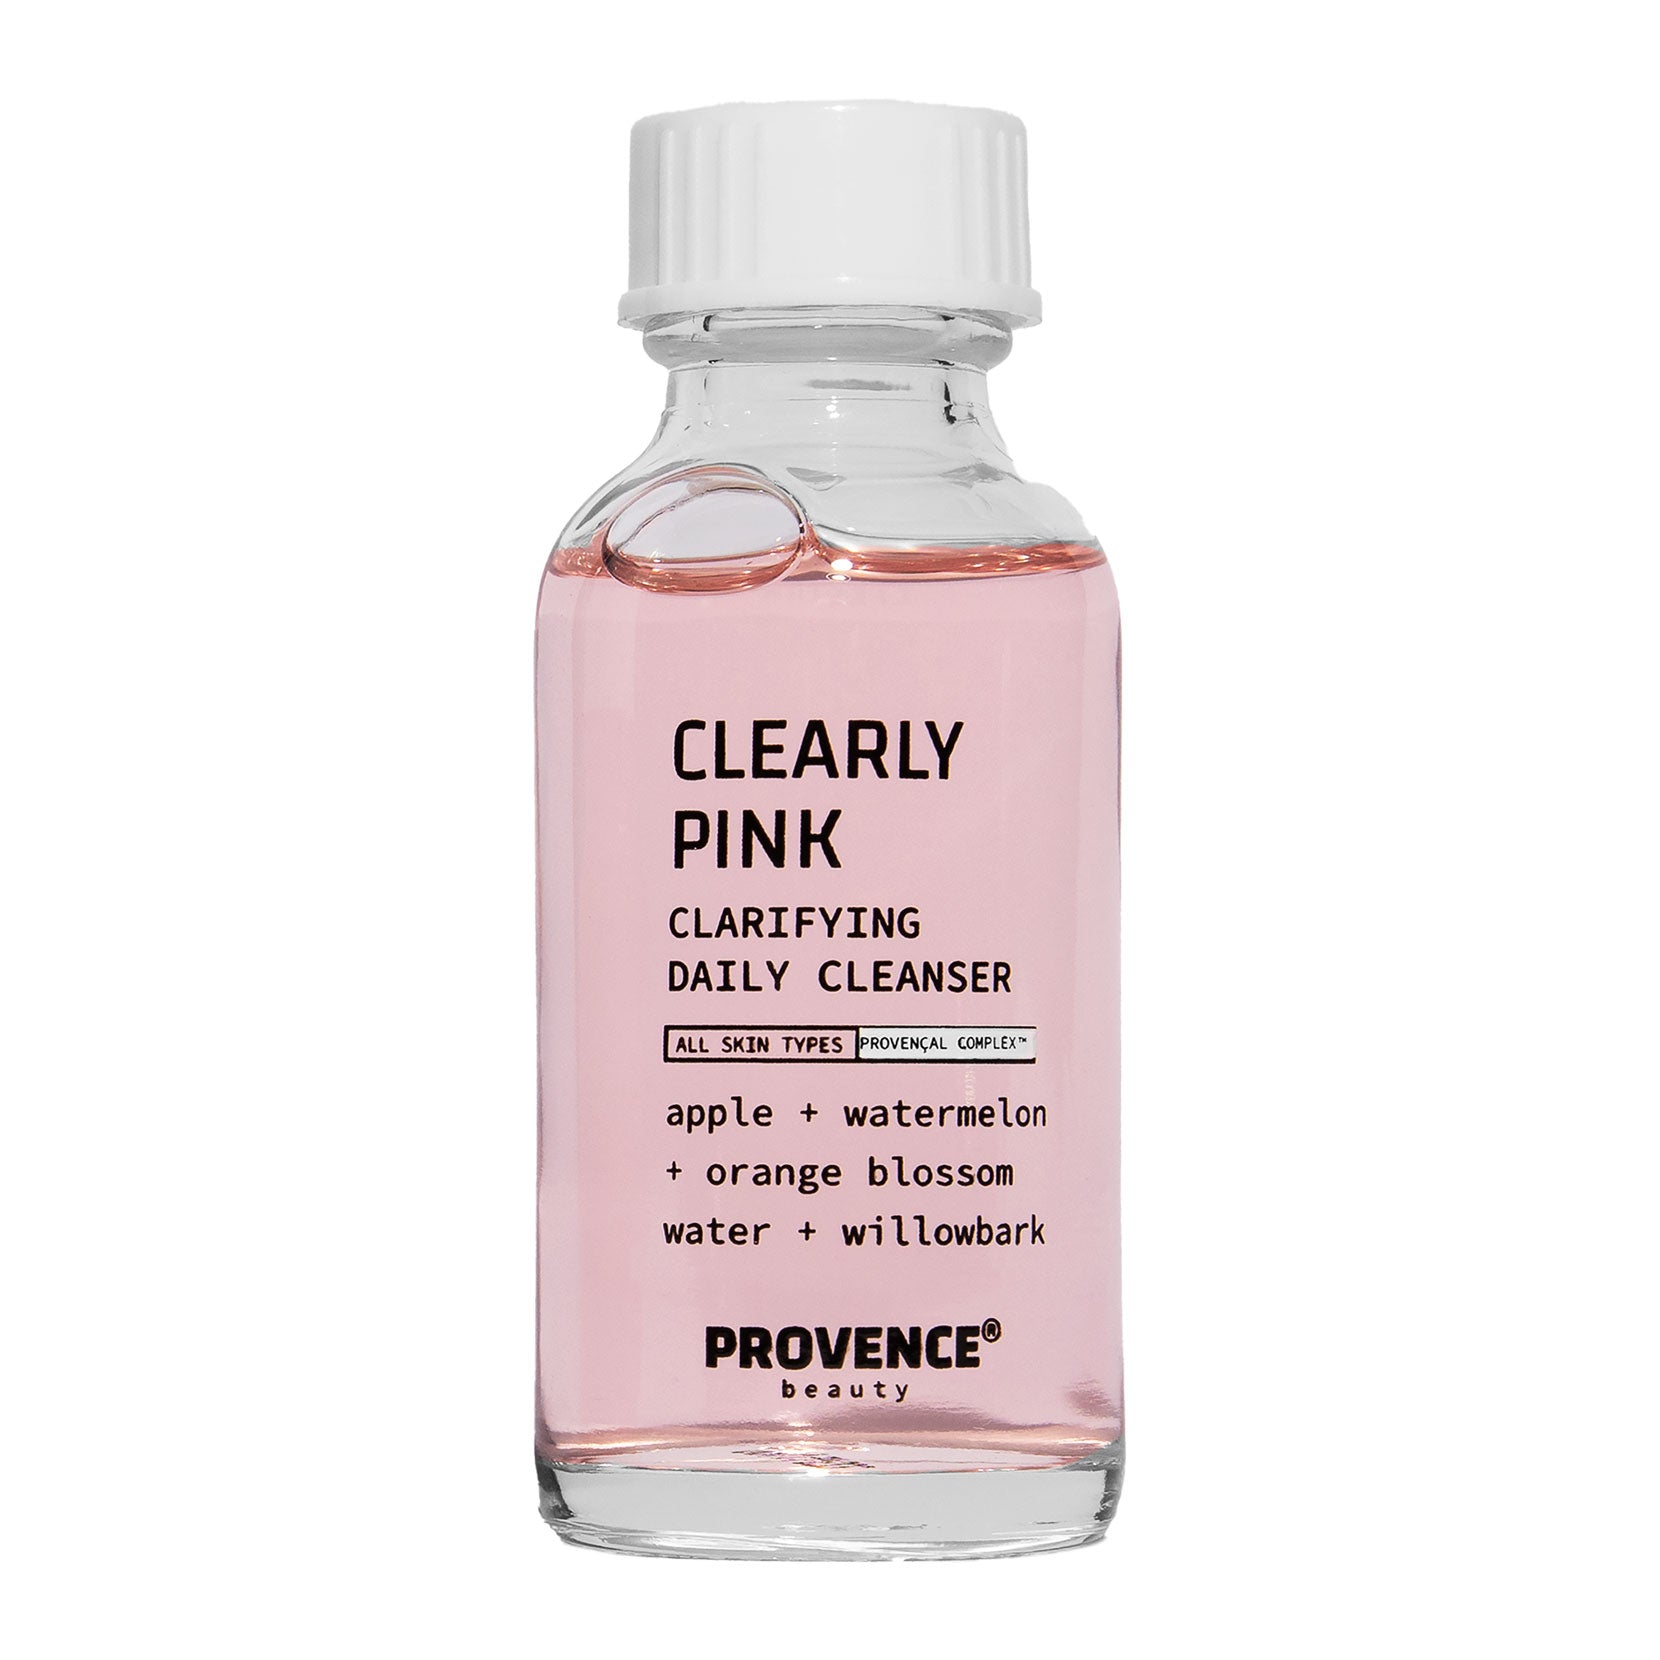 Clearly Pink Clarifying Daily Cleanser Mini